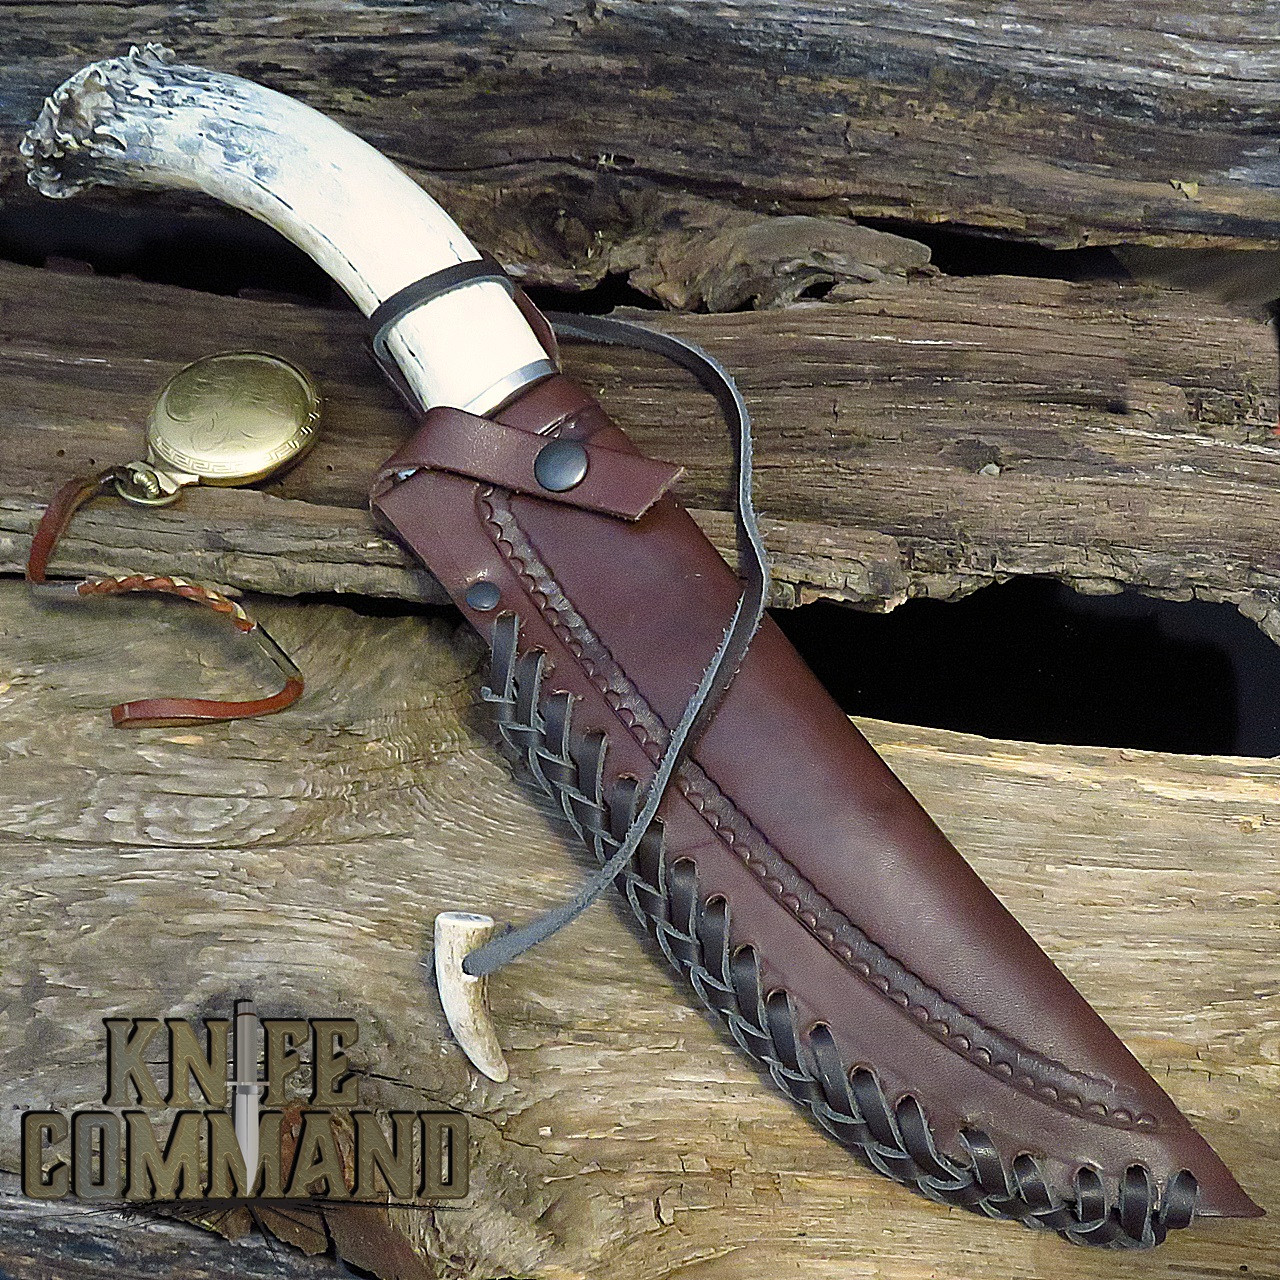 Silver Stag Tool Series Big Bowie SSB10.0 Crown Stag Hunting Knife 10" Clip Point Bowie 1095